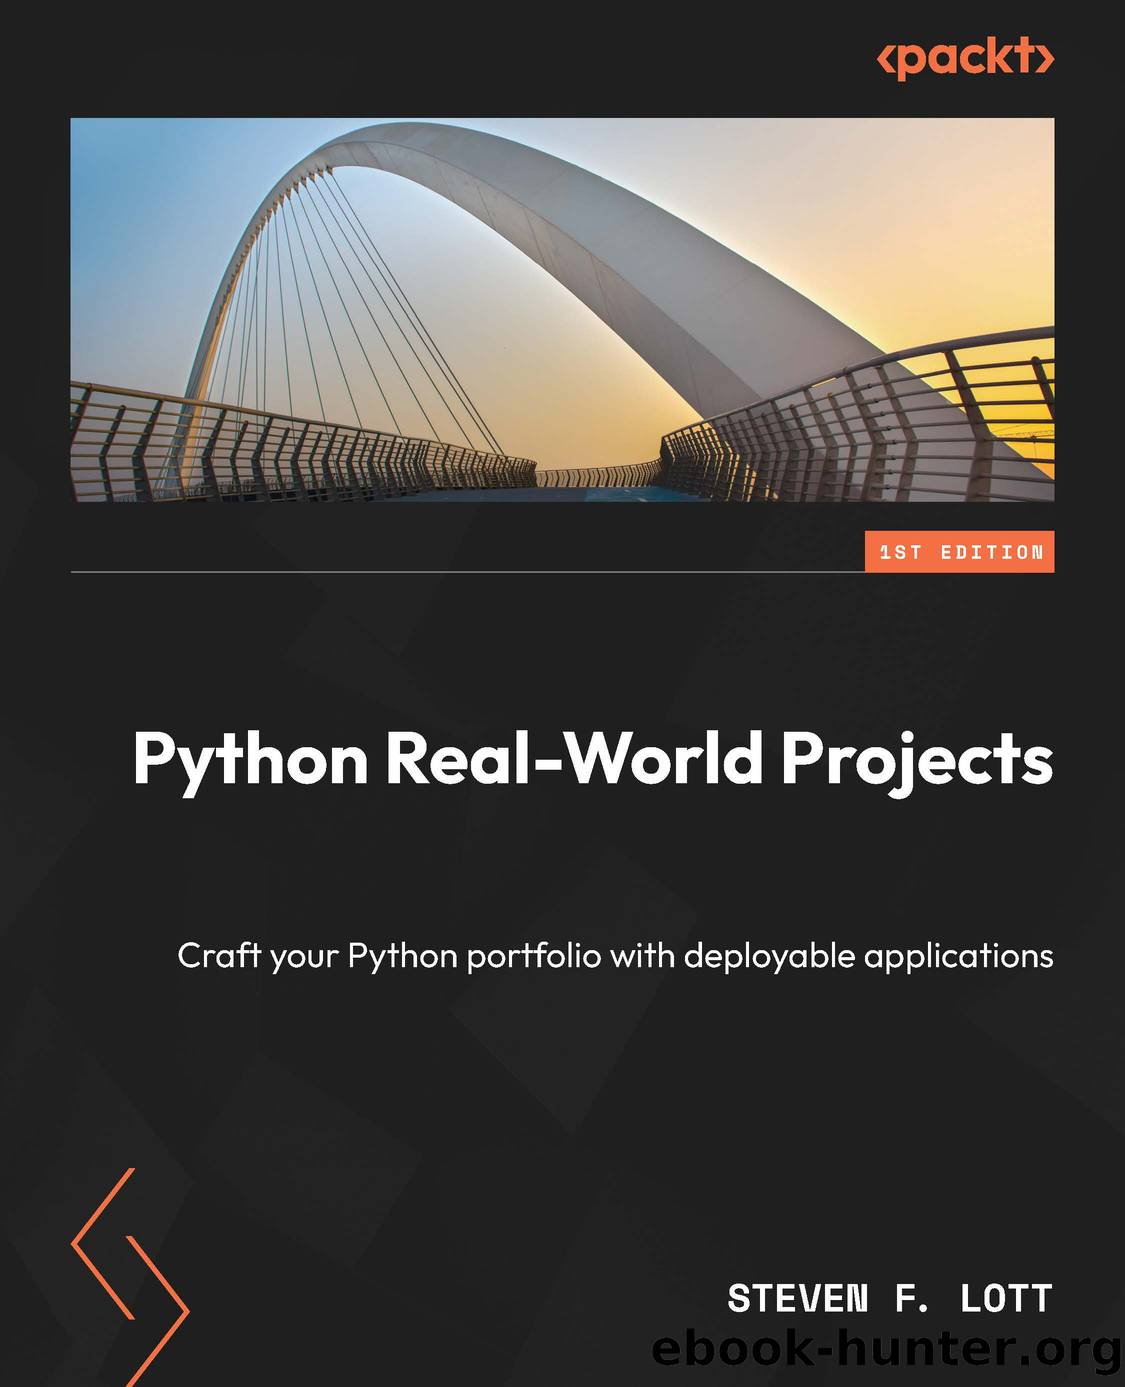 Python Real-World Projects by Steven F. Lott